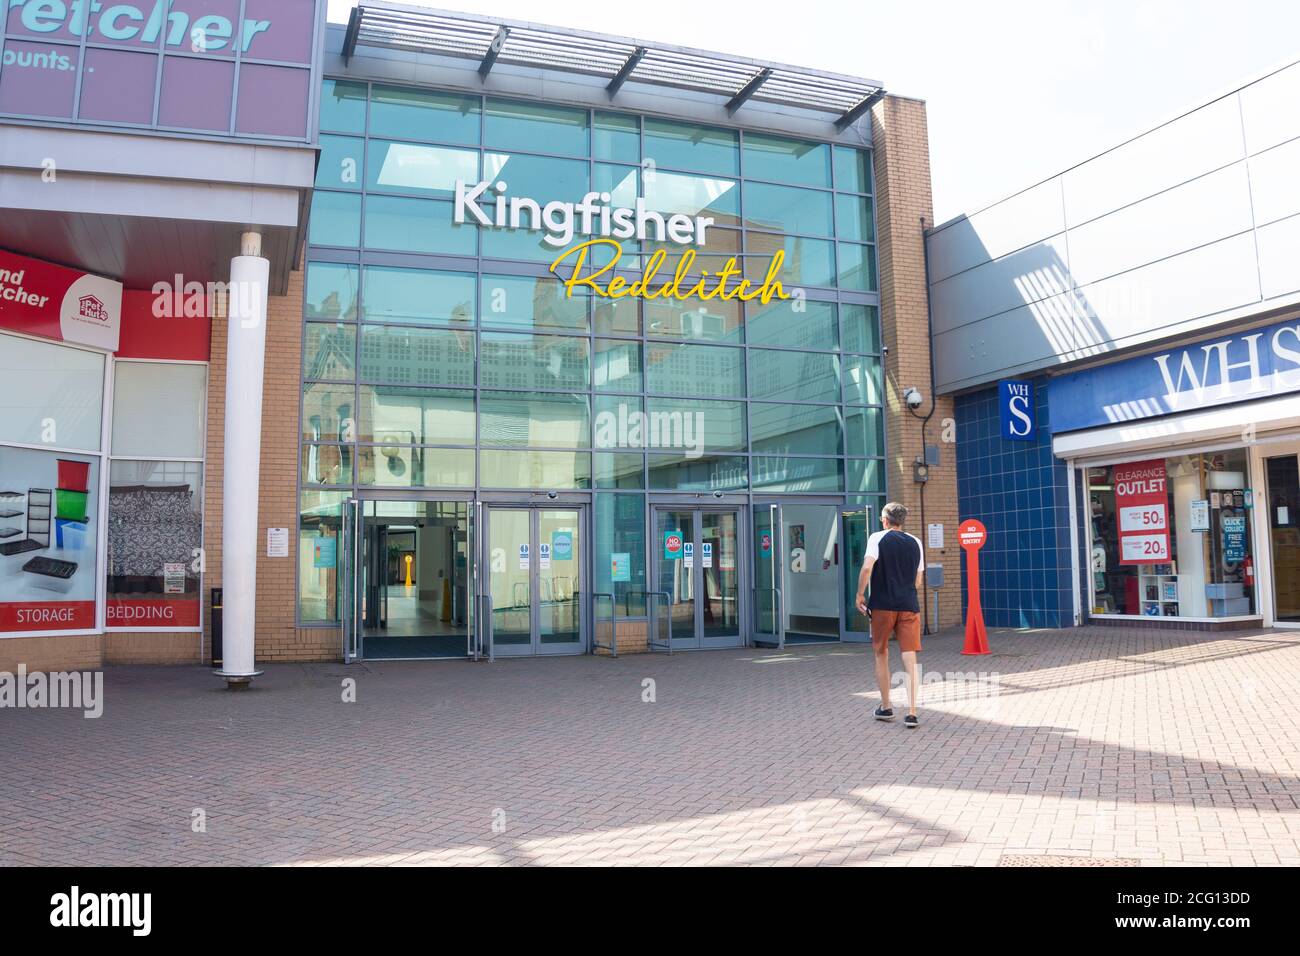 Entrance to Kingfisher Shopping centre, Walford Walk, Silver Street, Redditch, Worcestershire, England, United Kingdom Stock Photo